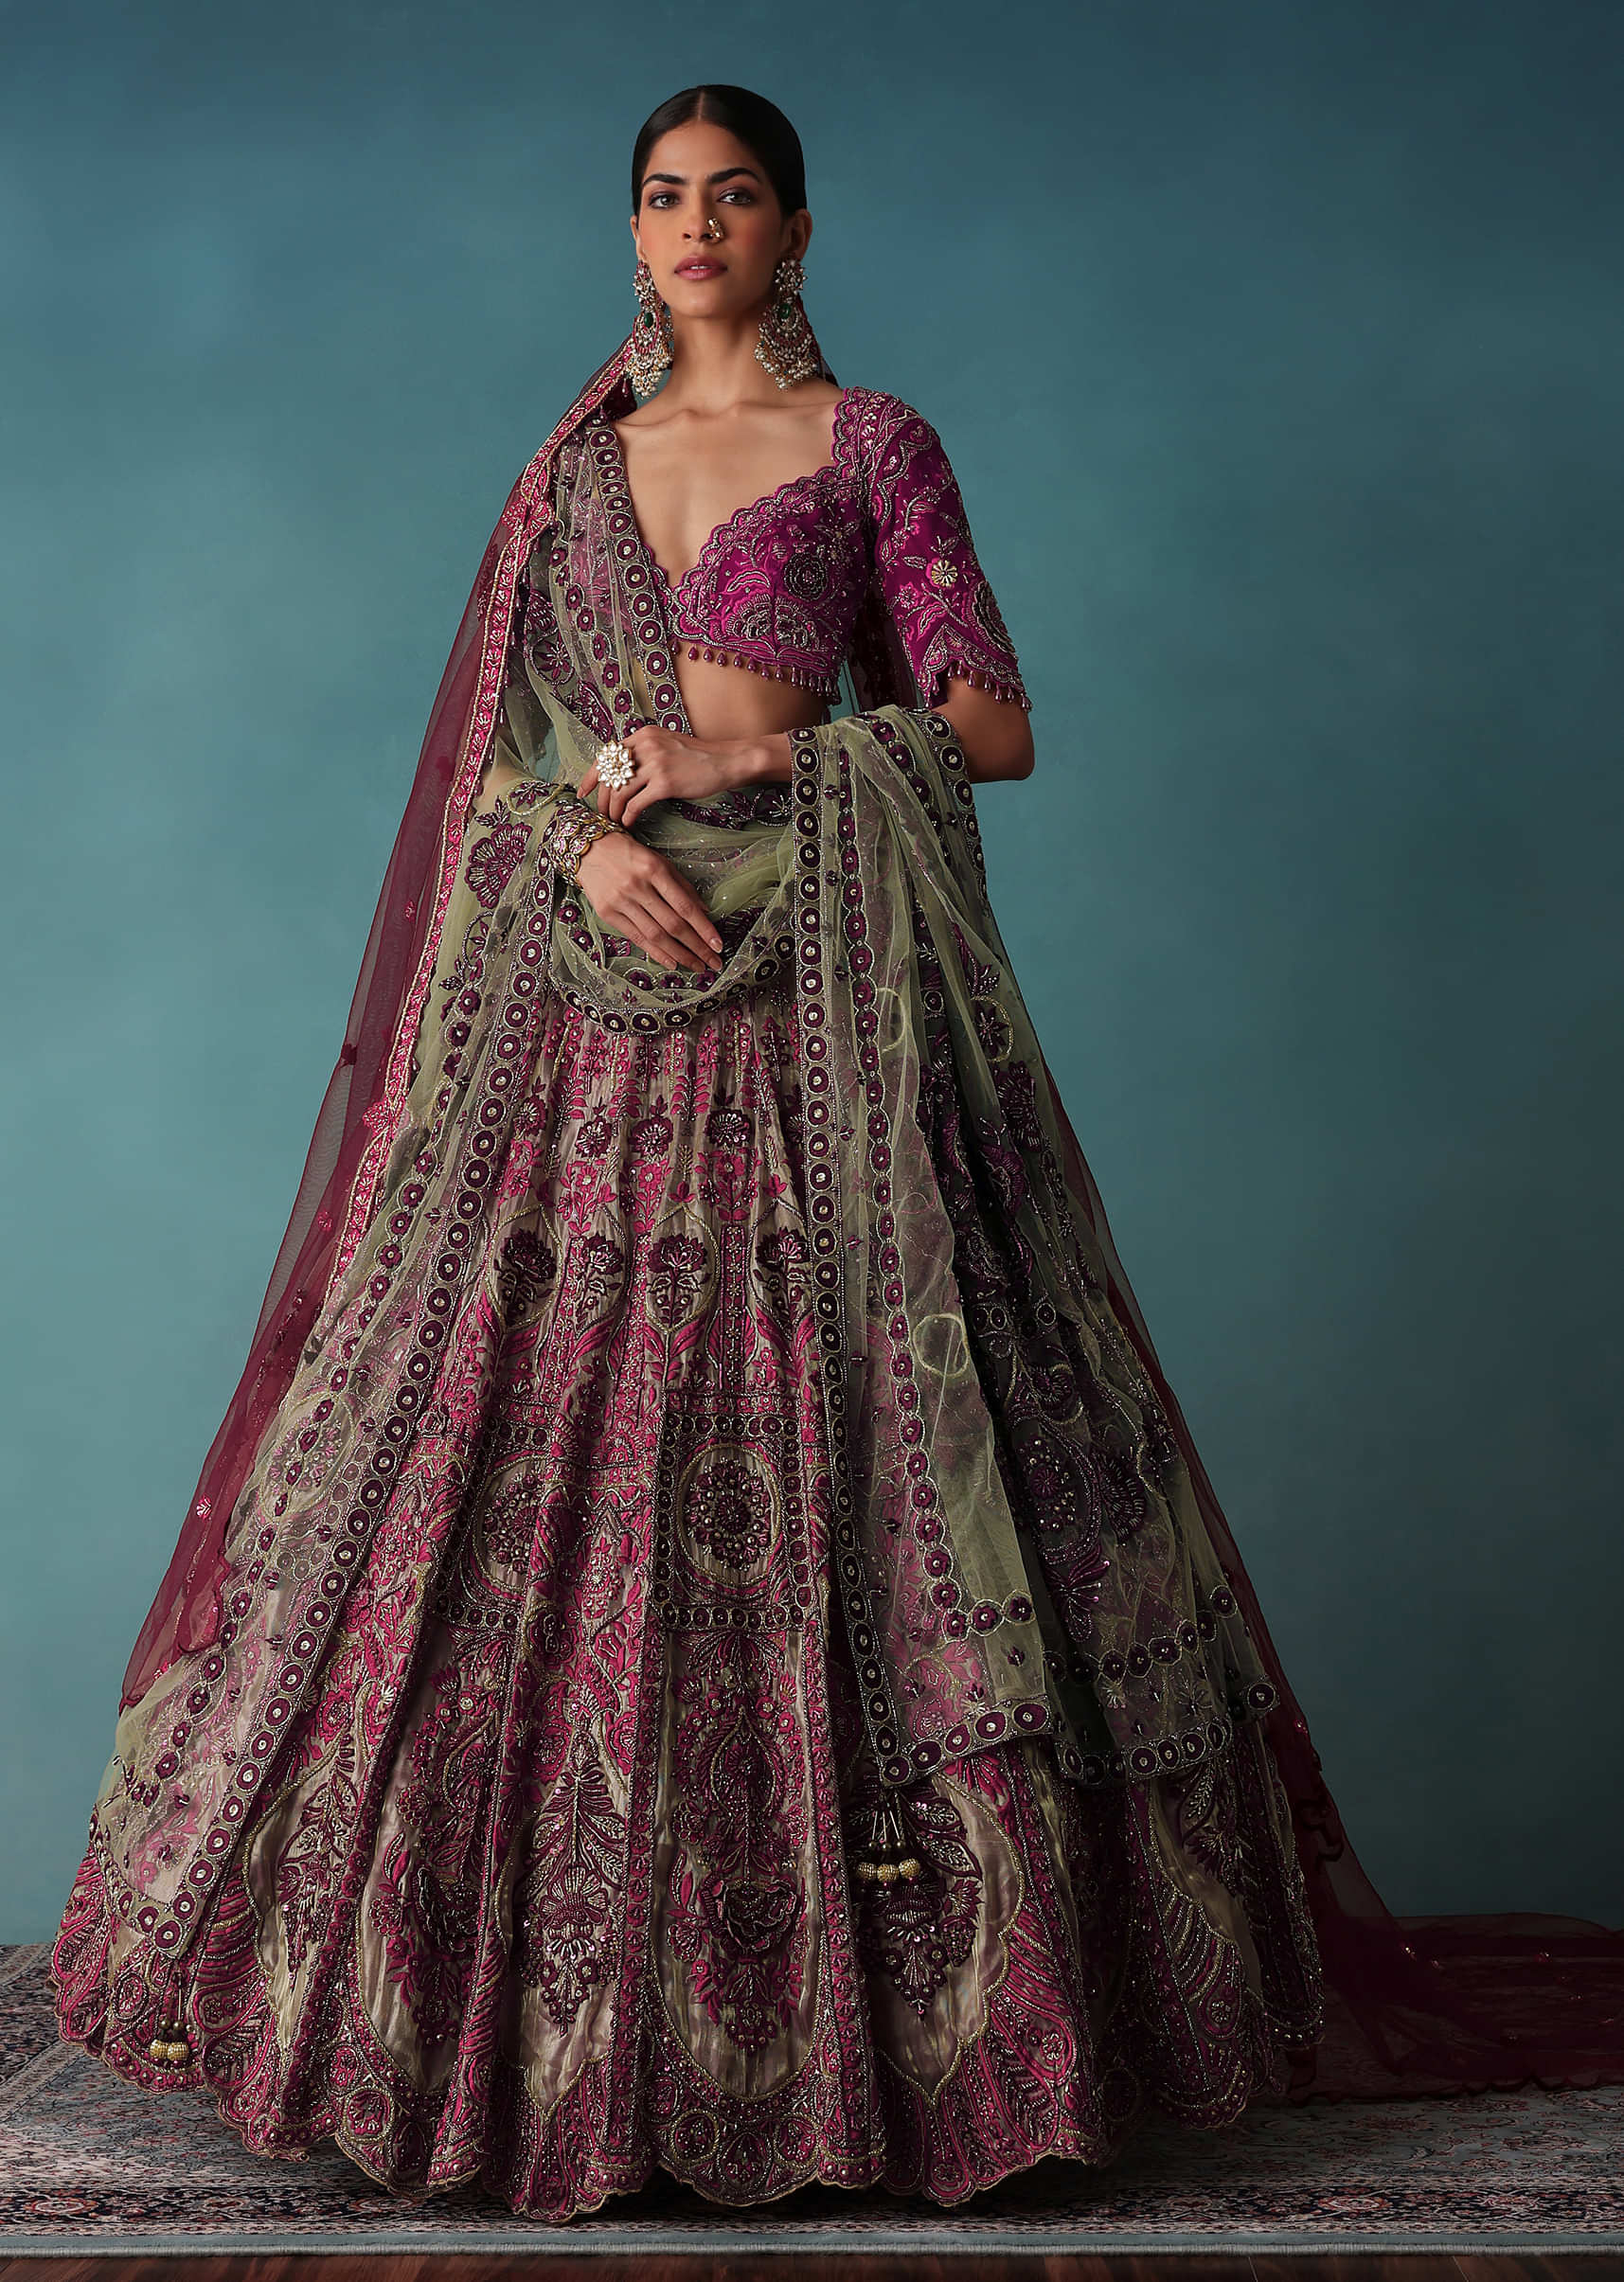 What should I wear in a summer, Indian wedding ceremony? - Quora